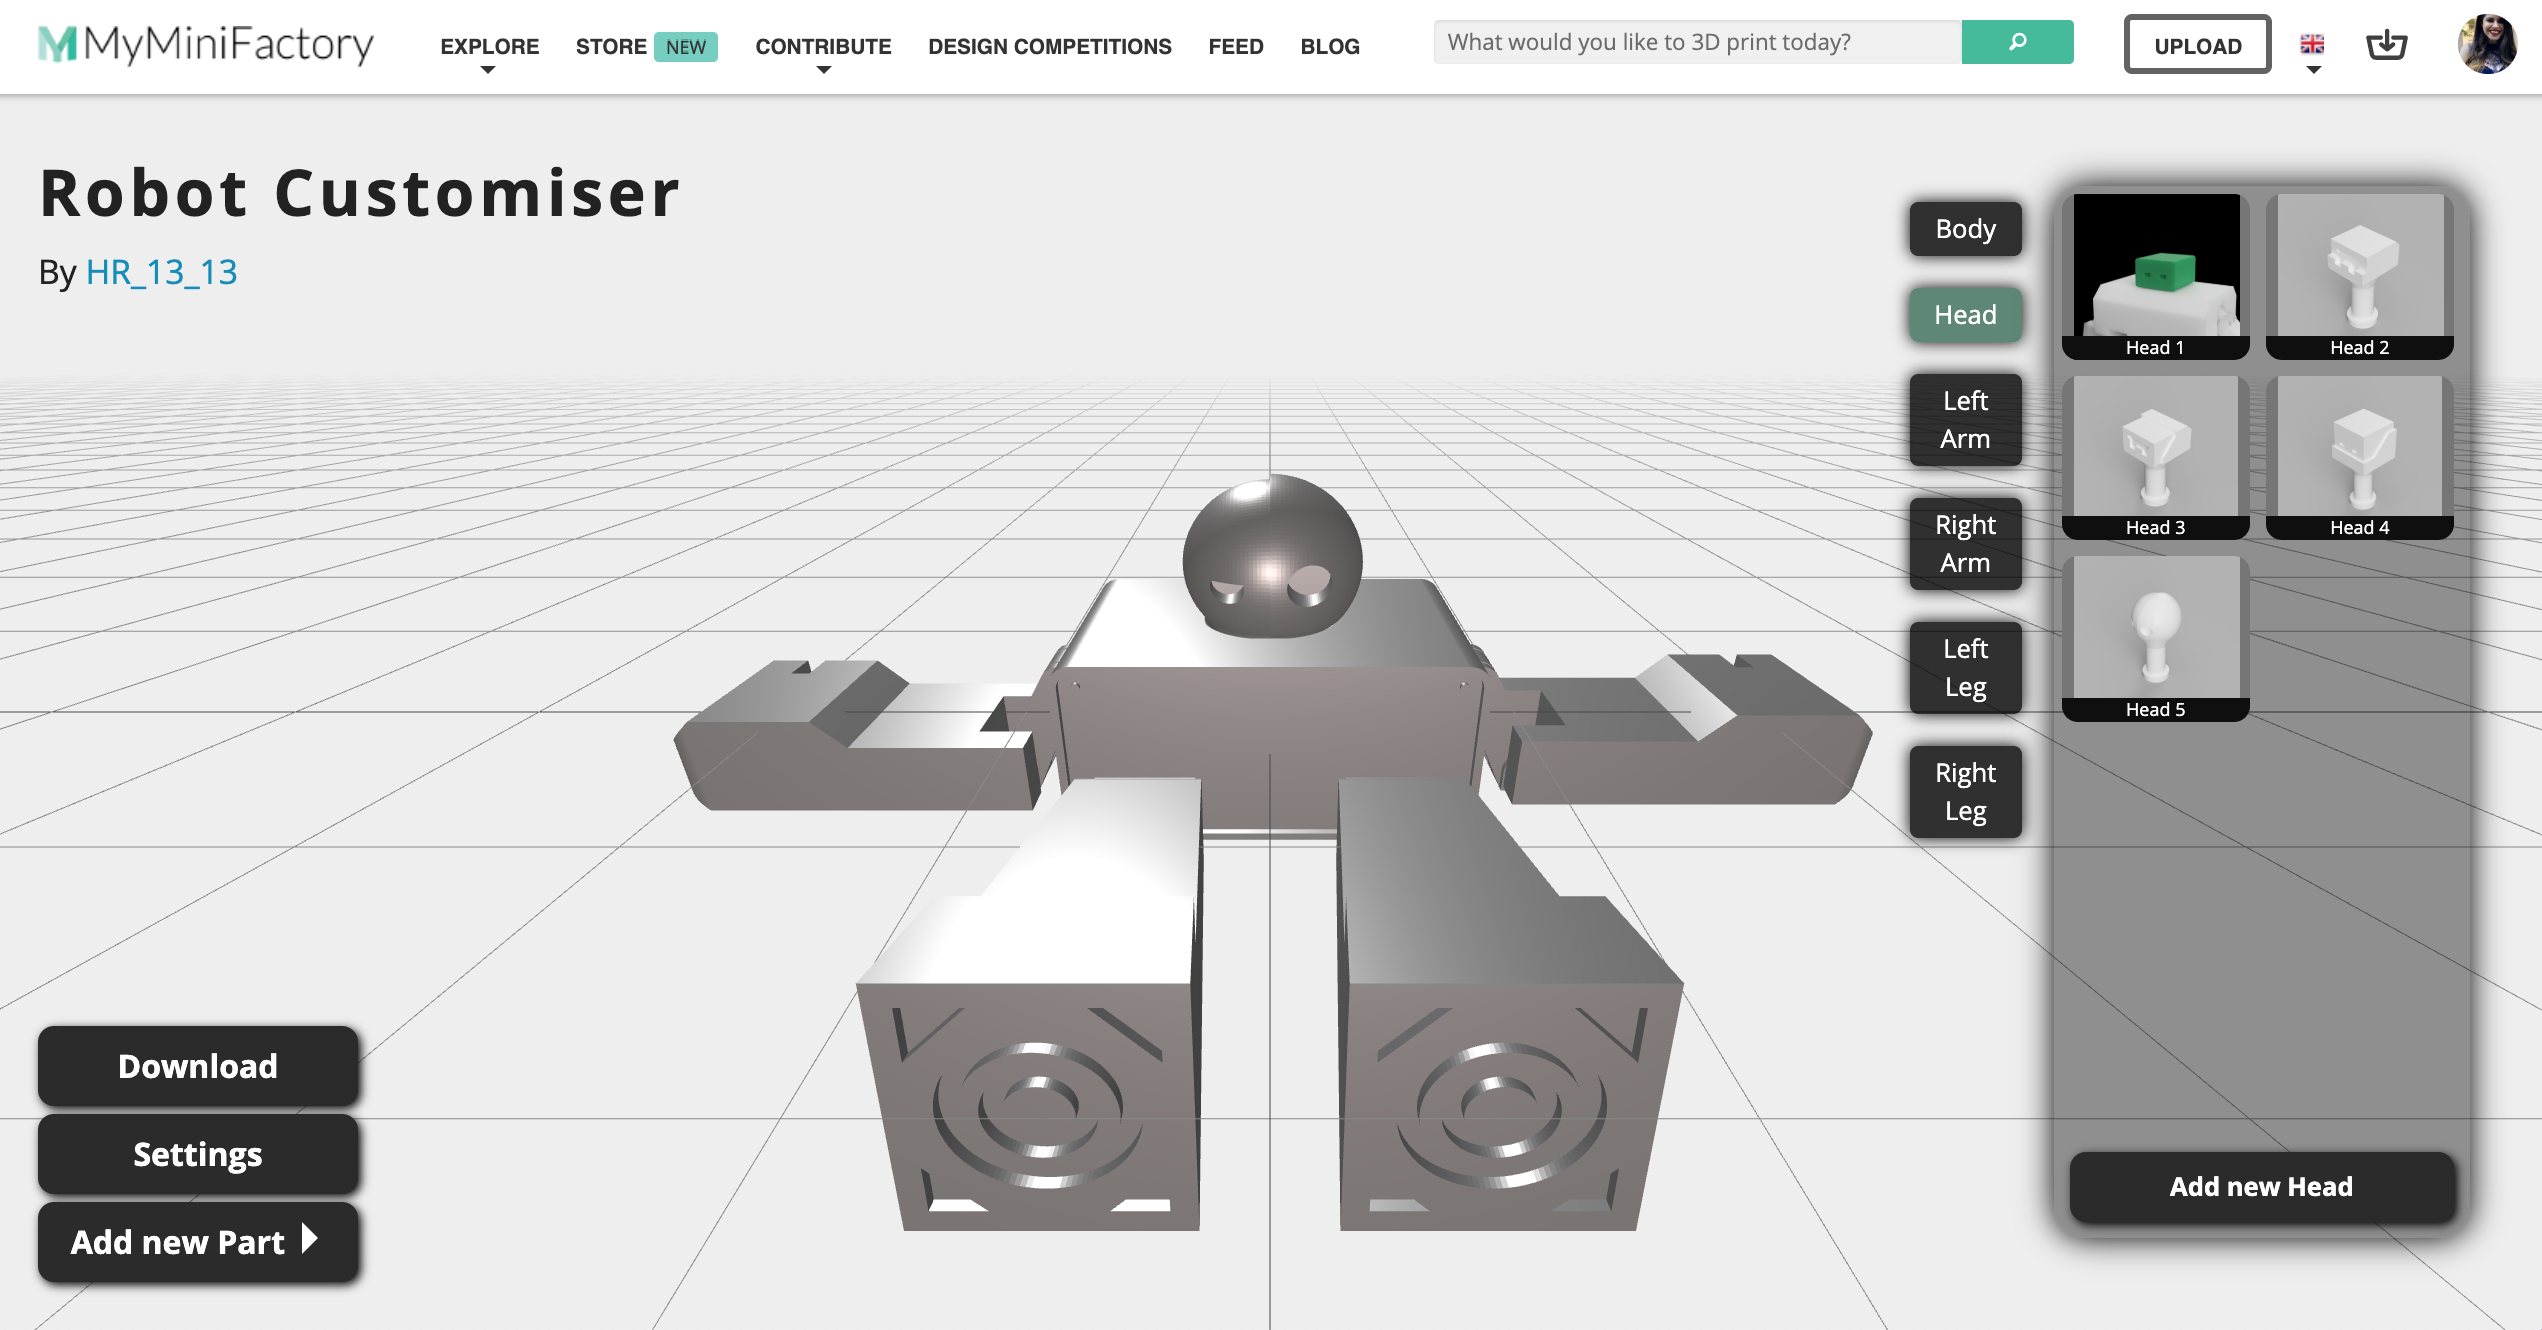 MMF's customizer tool, showcasing the different options for the head part of the robot. Image via MyMiniFactory.